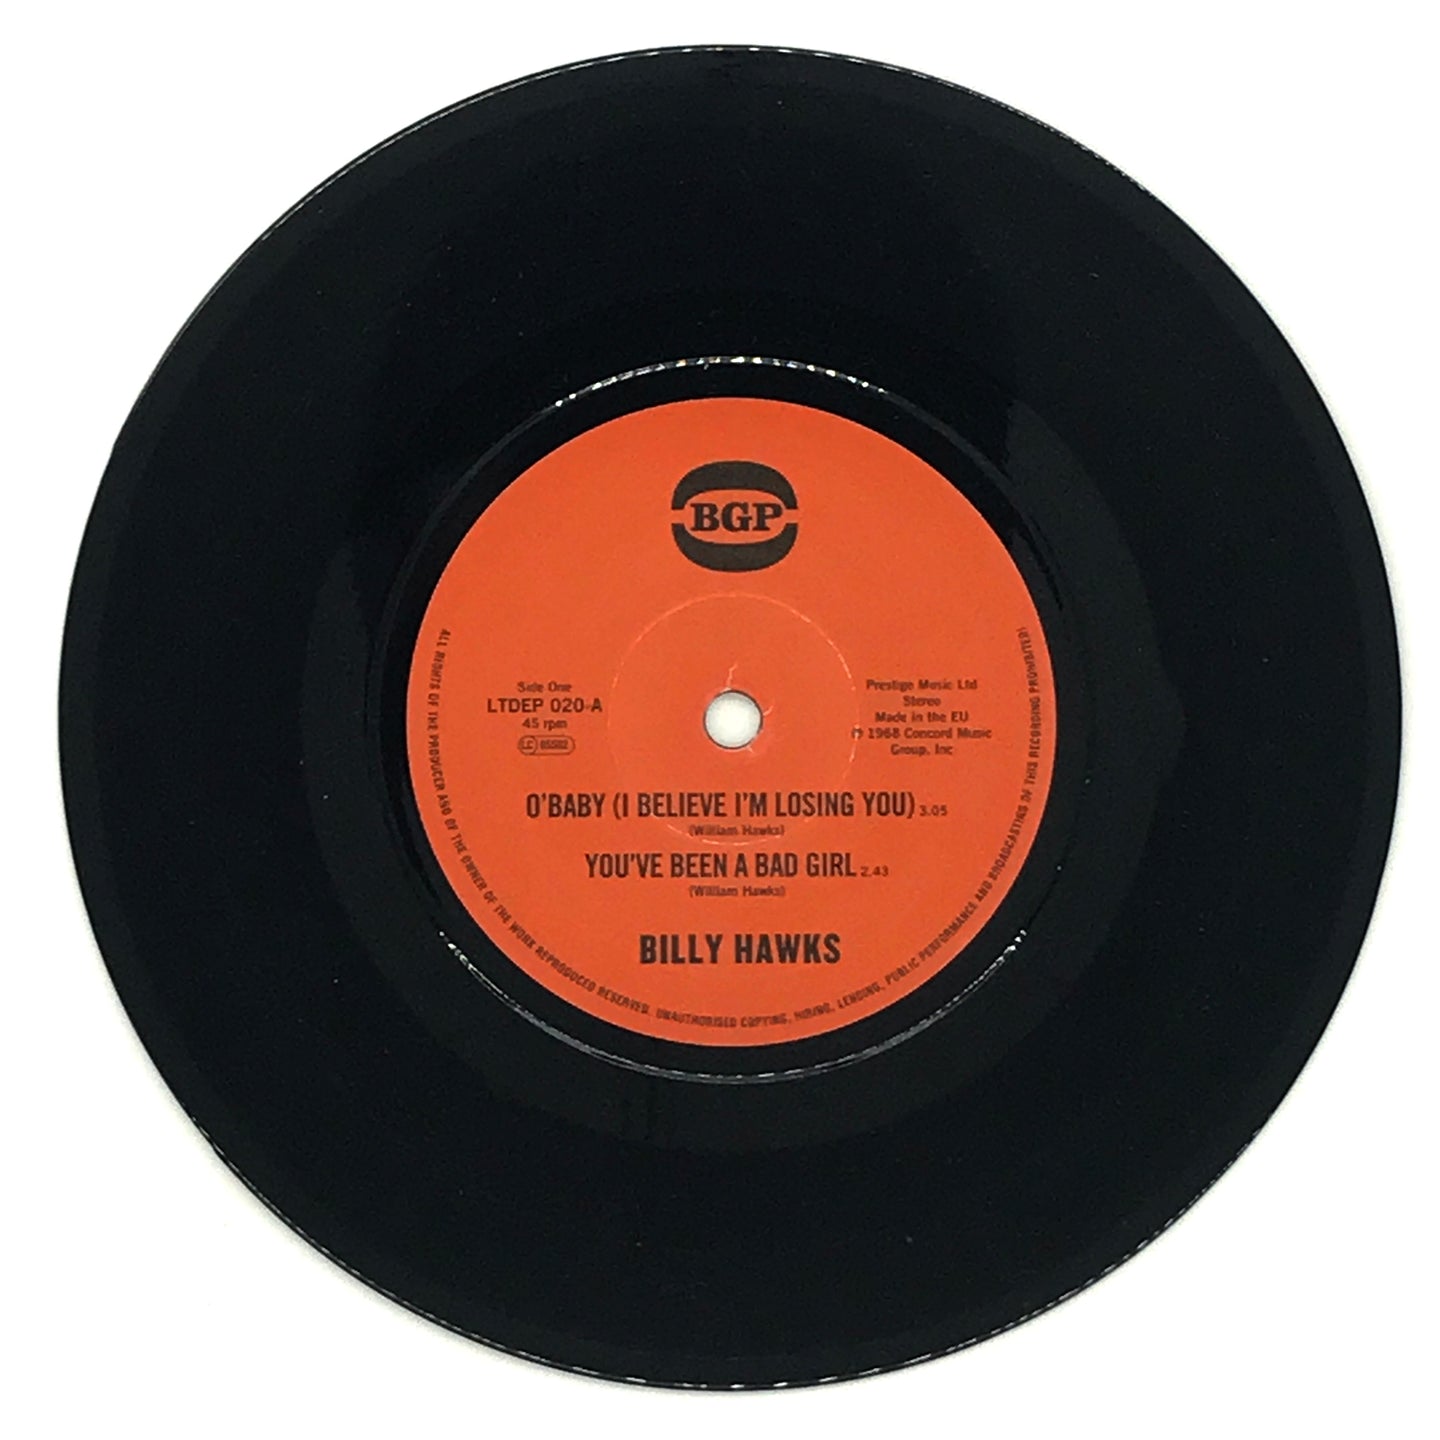 Billy Hawks : O'BABY (I BELIEVE I'M LOSING YOU)/ YOU'VE BEEN A BAD GIRL/ WHIP IT ON ME/ WHAT MORE CAN I DO?